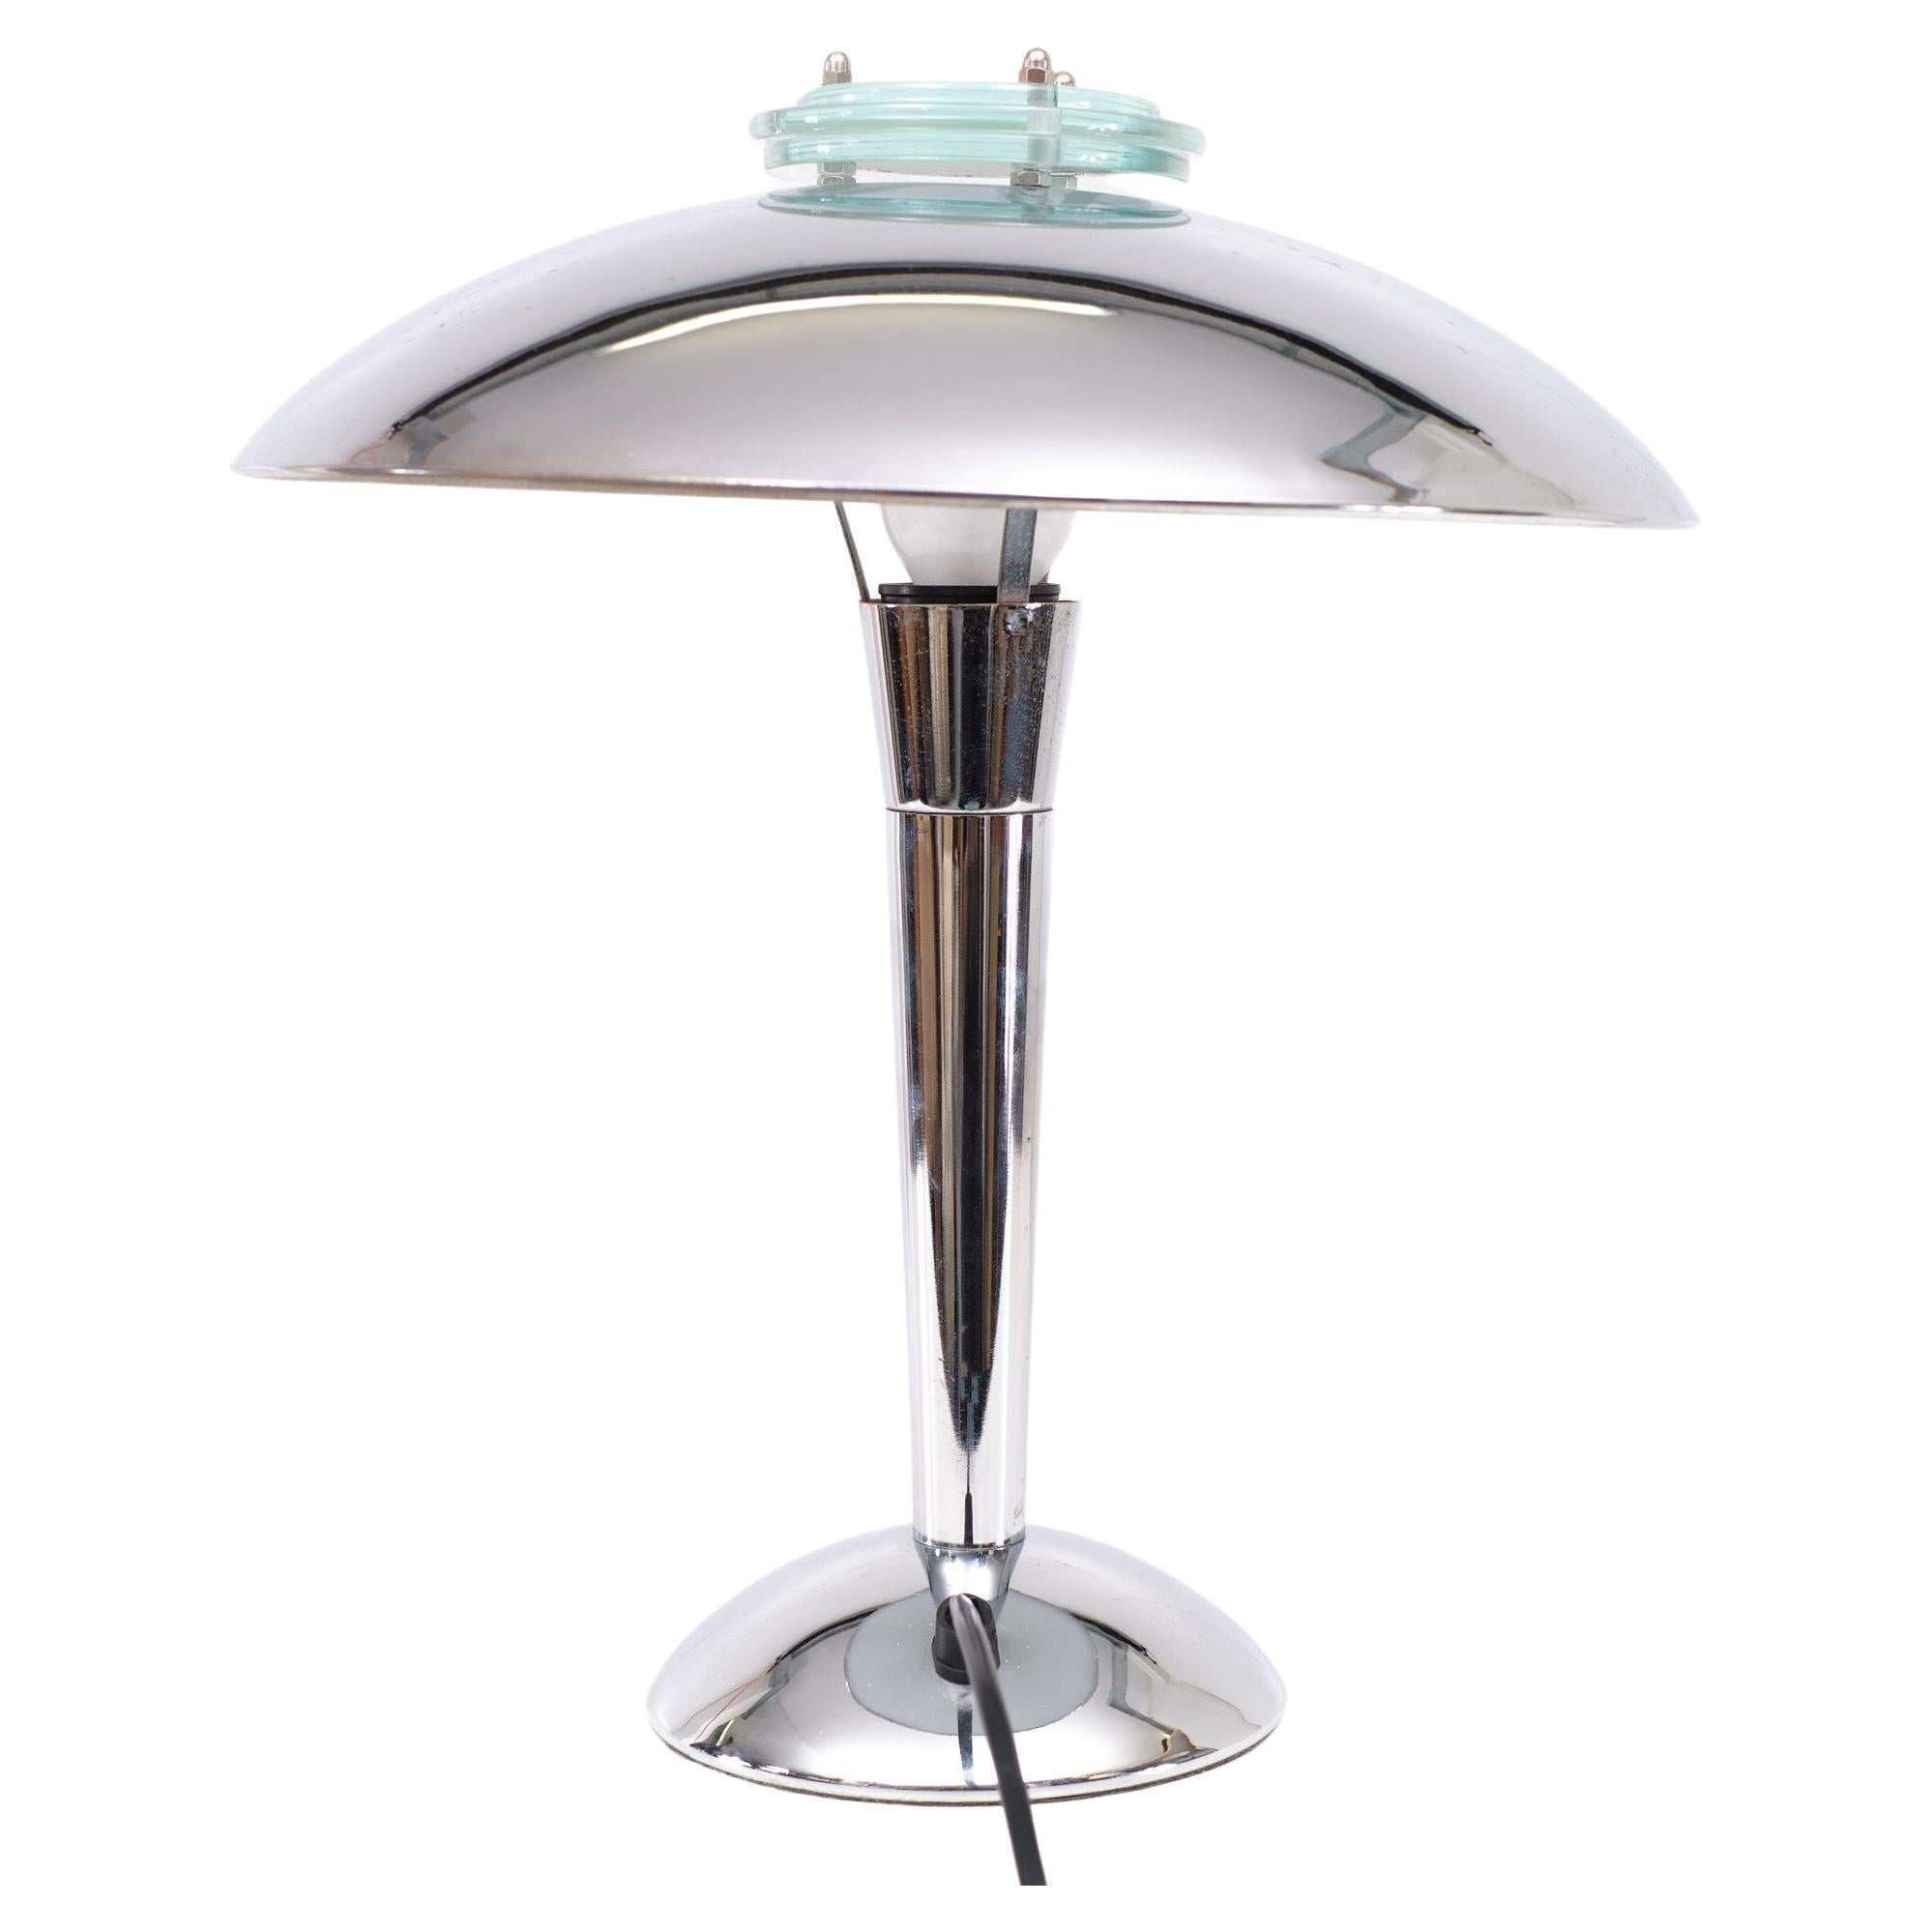 Chrome Table lamp Model Tokyo ,in the Bauhaus style . Comes with Three round glass 
plates on .top .That gives the light a nice diffuse effect . 
Designed in the early 1980s  by  W.K. WU products. Large E27 bulb needed . 
